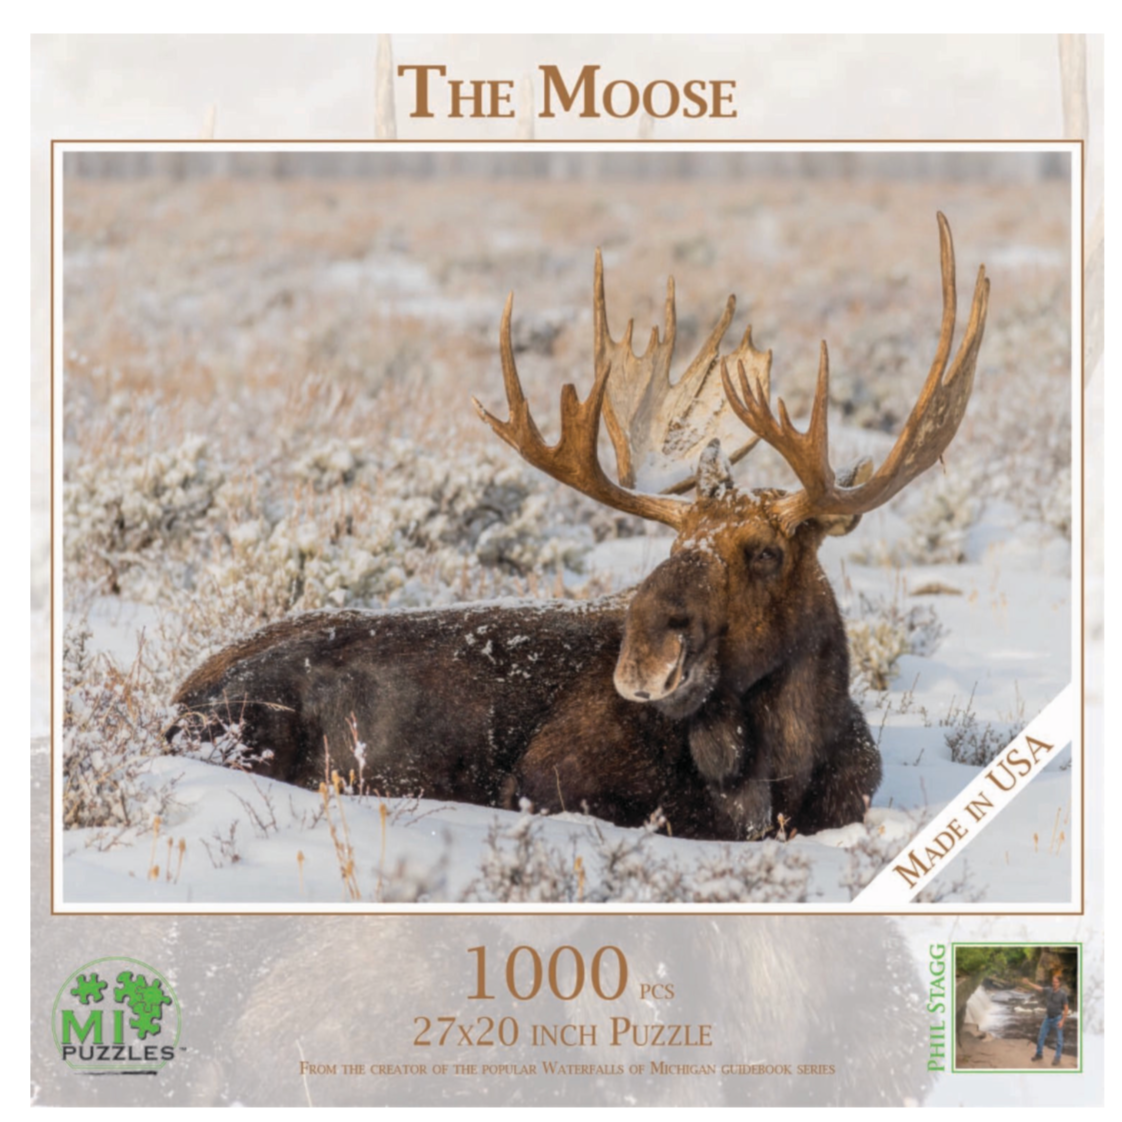 The Moose 1000 pc Jigsaw Puzzle